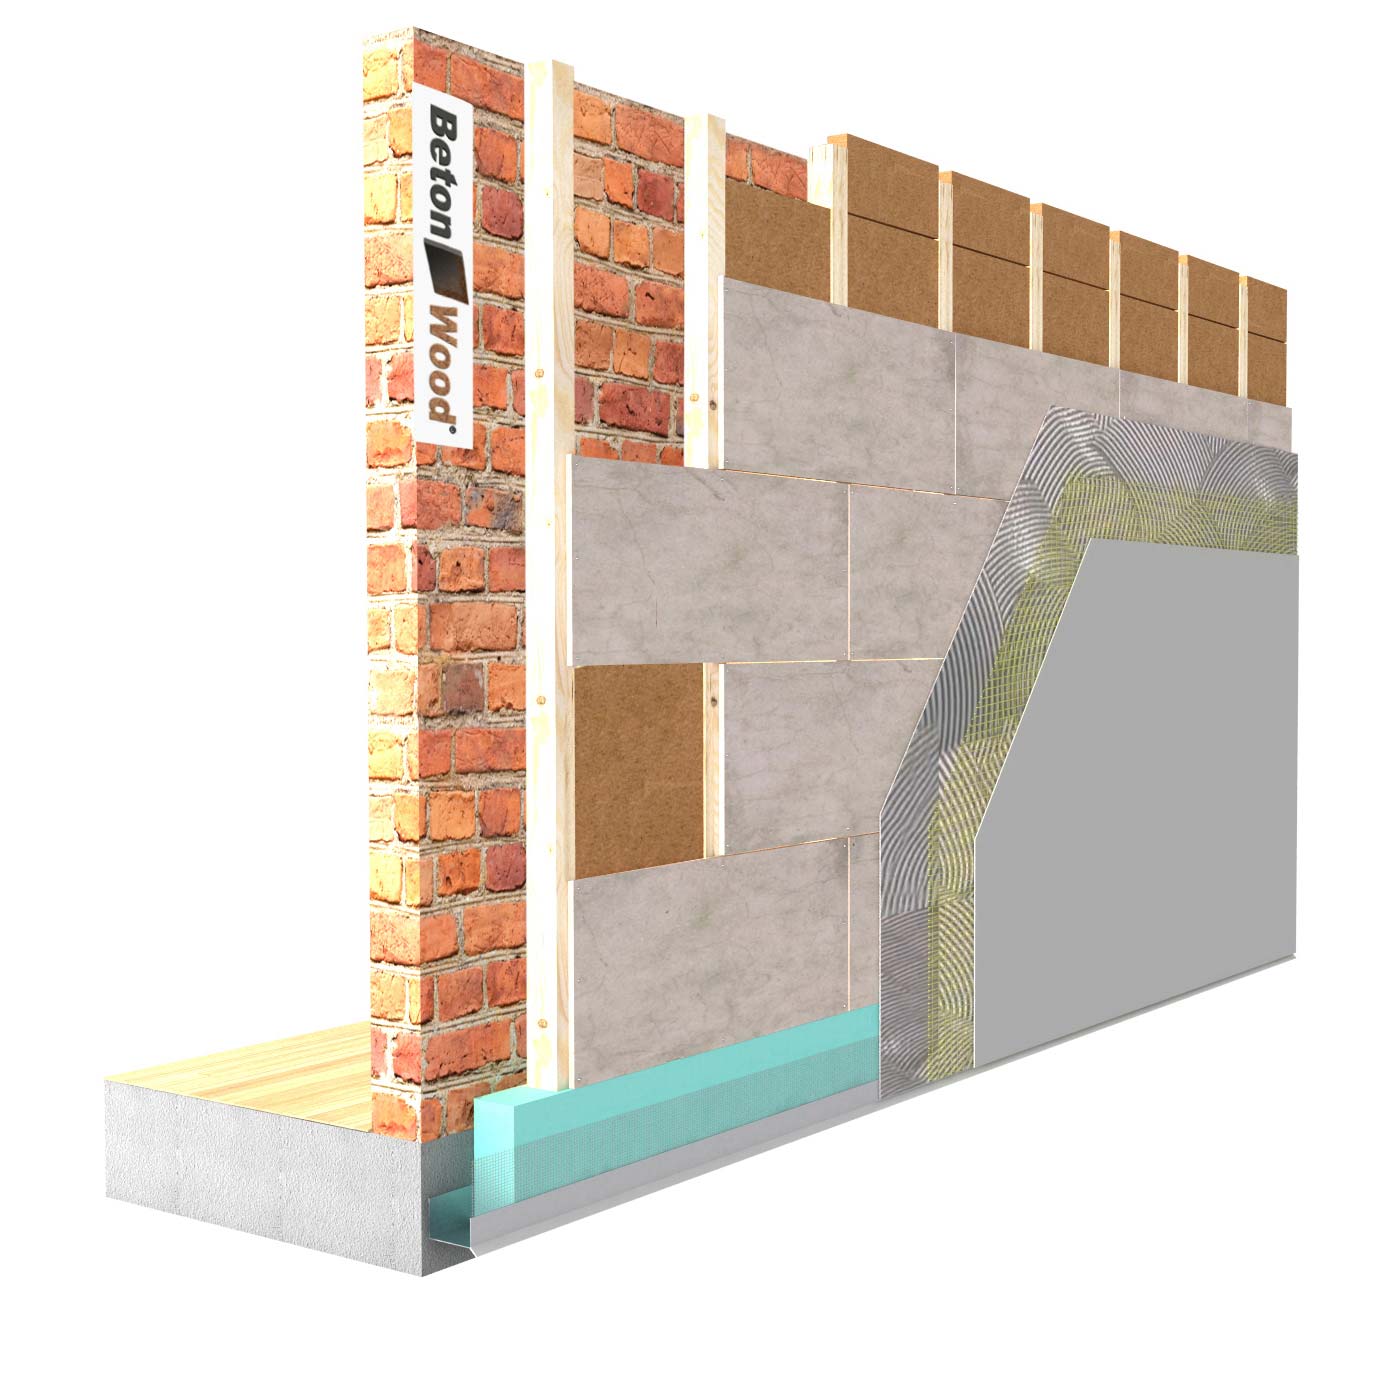 External insulation system with Fiber Wood FiberTherm and cement bonded particle board on masonry